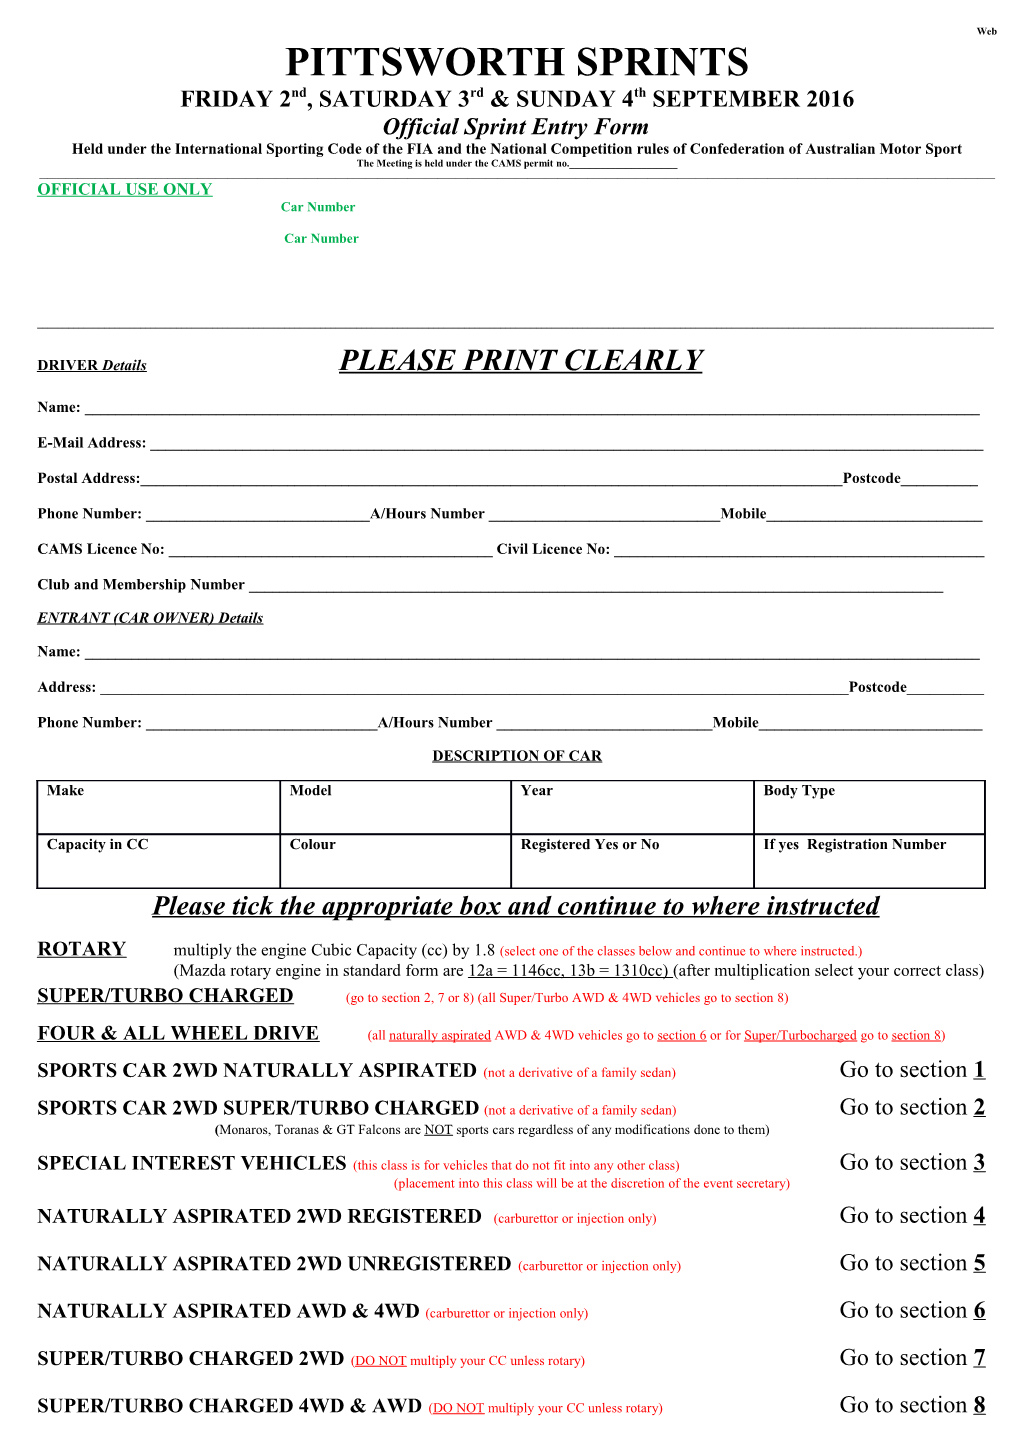 Official Sprint Entry Form